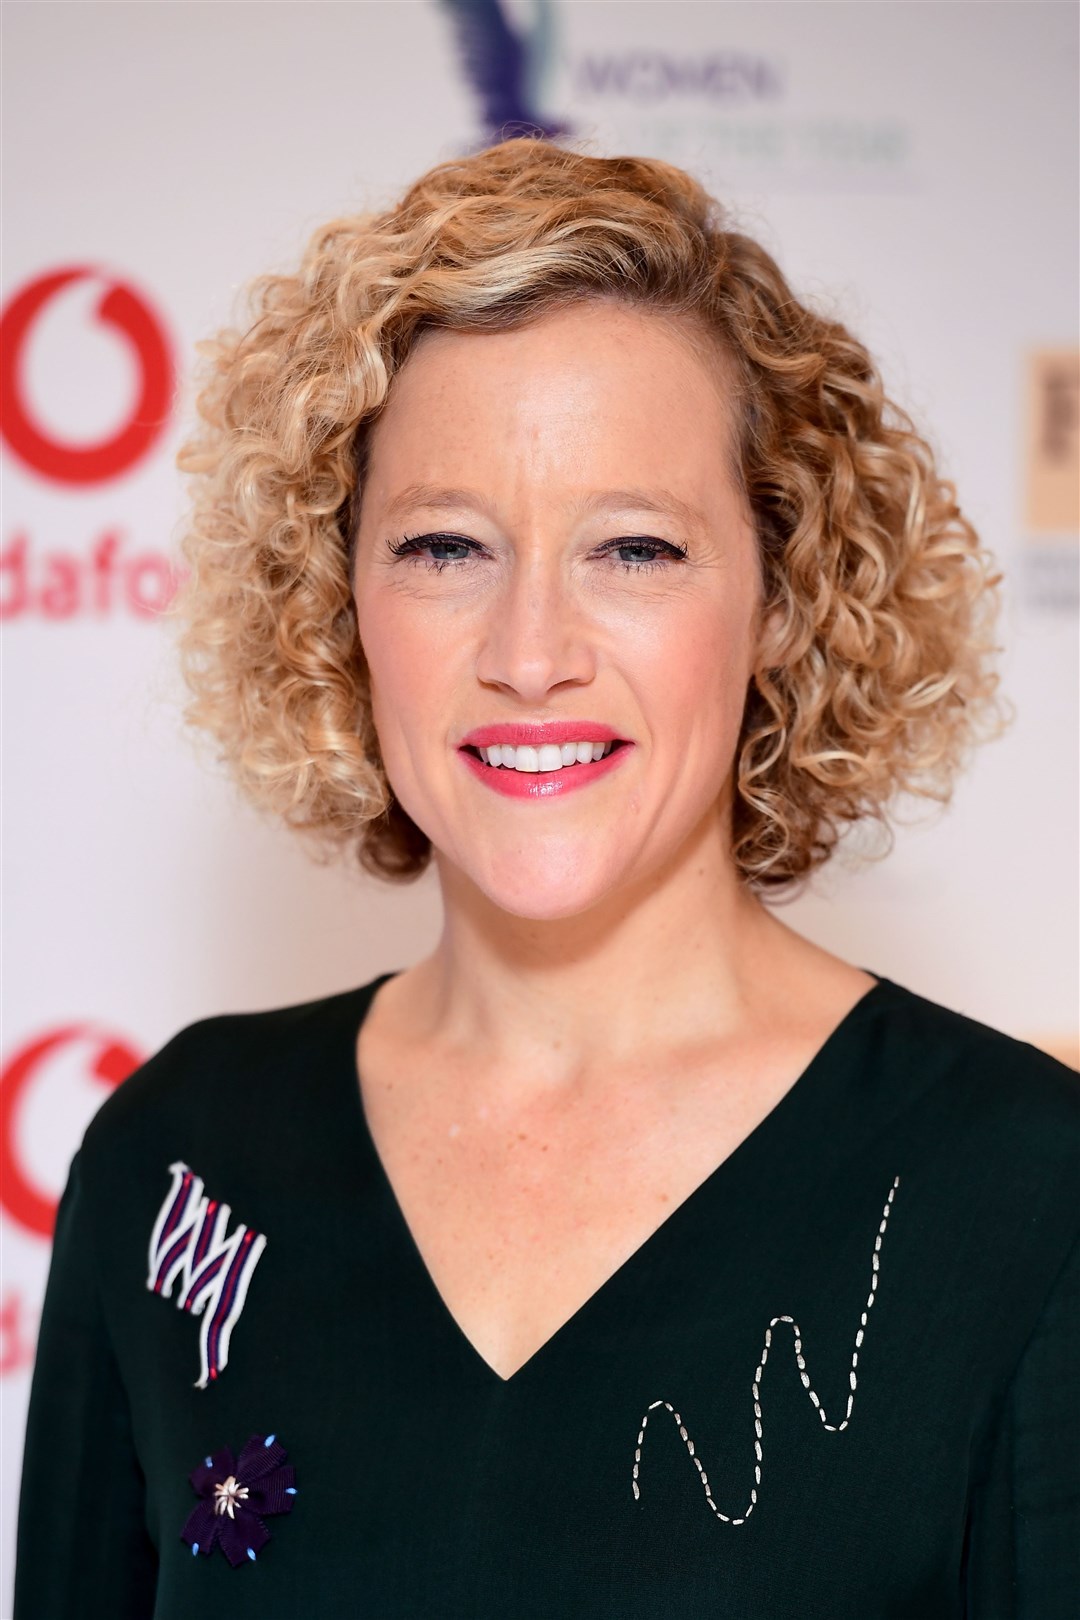 Cathy Newman watched digitally altered videos of herself after Channel 4 News did an investigation into deepfake pornography (Ian West/PA)